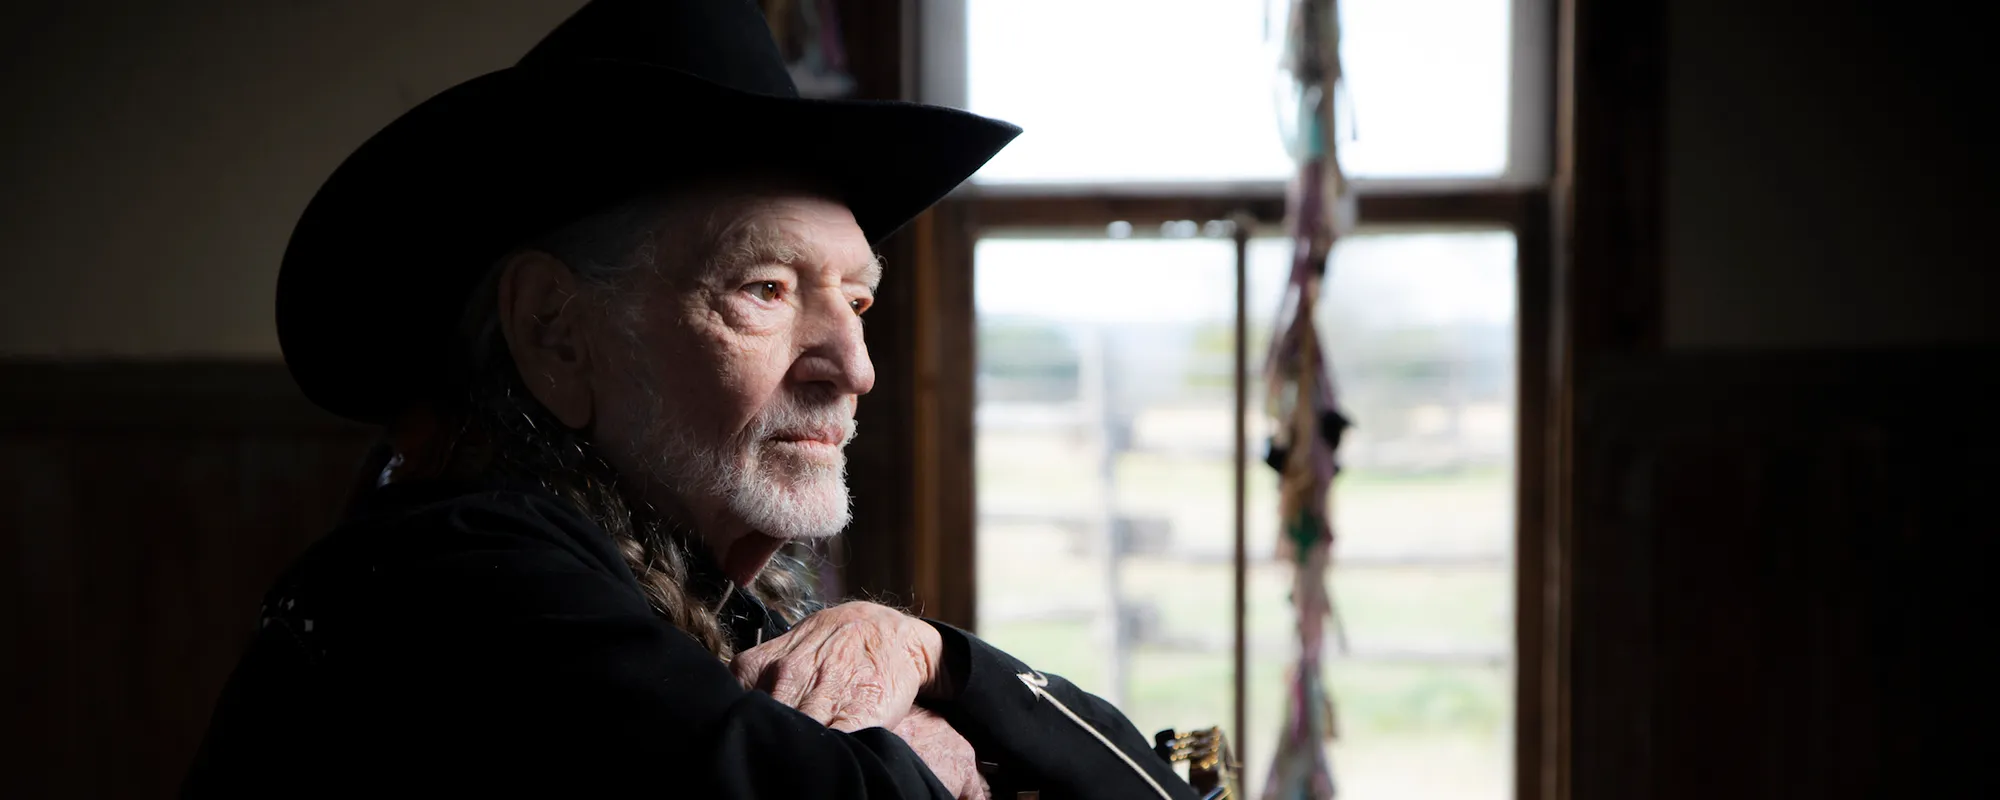 A Pair of Beloved Willie Nelson Albums Coming to Vinyl